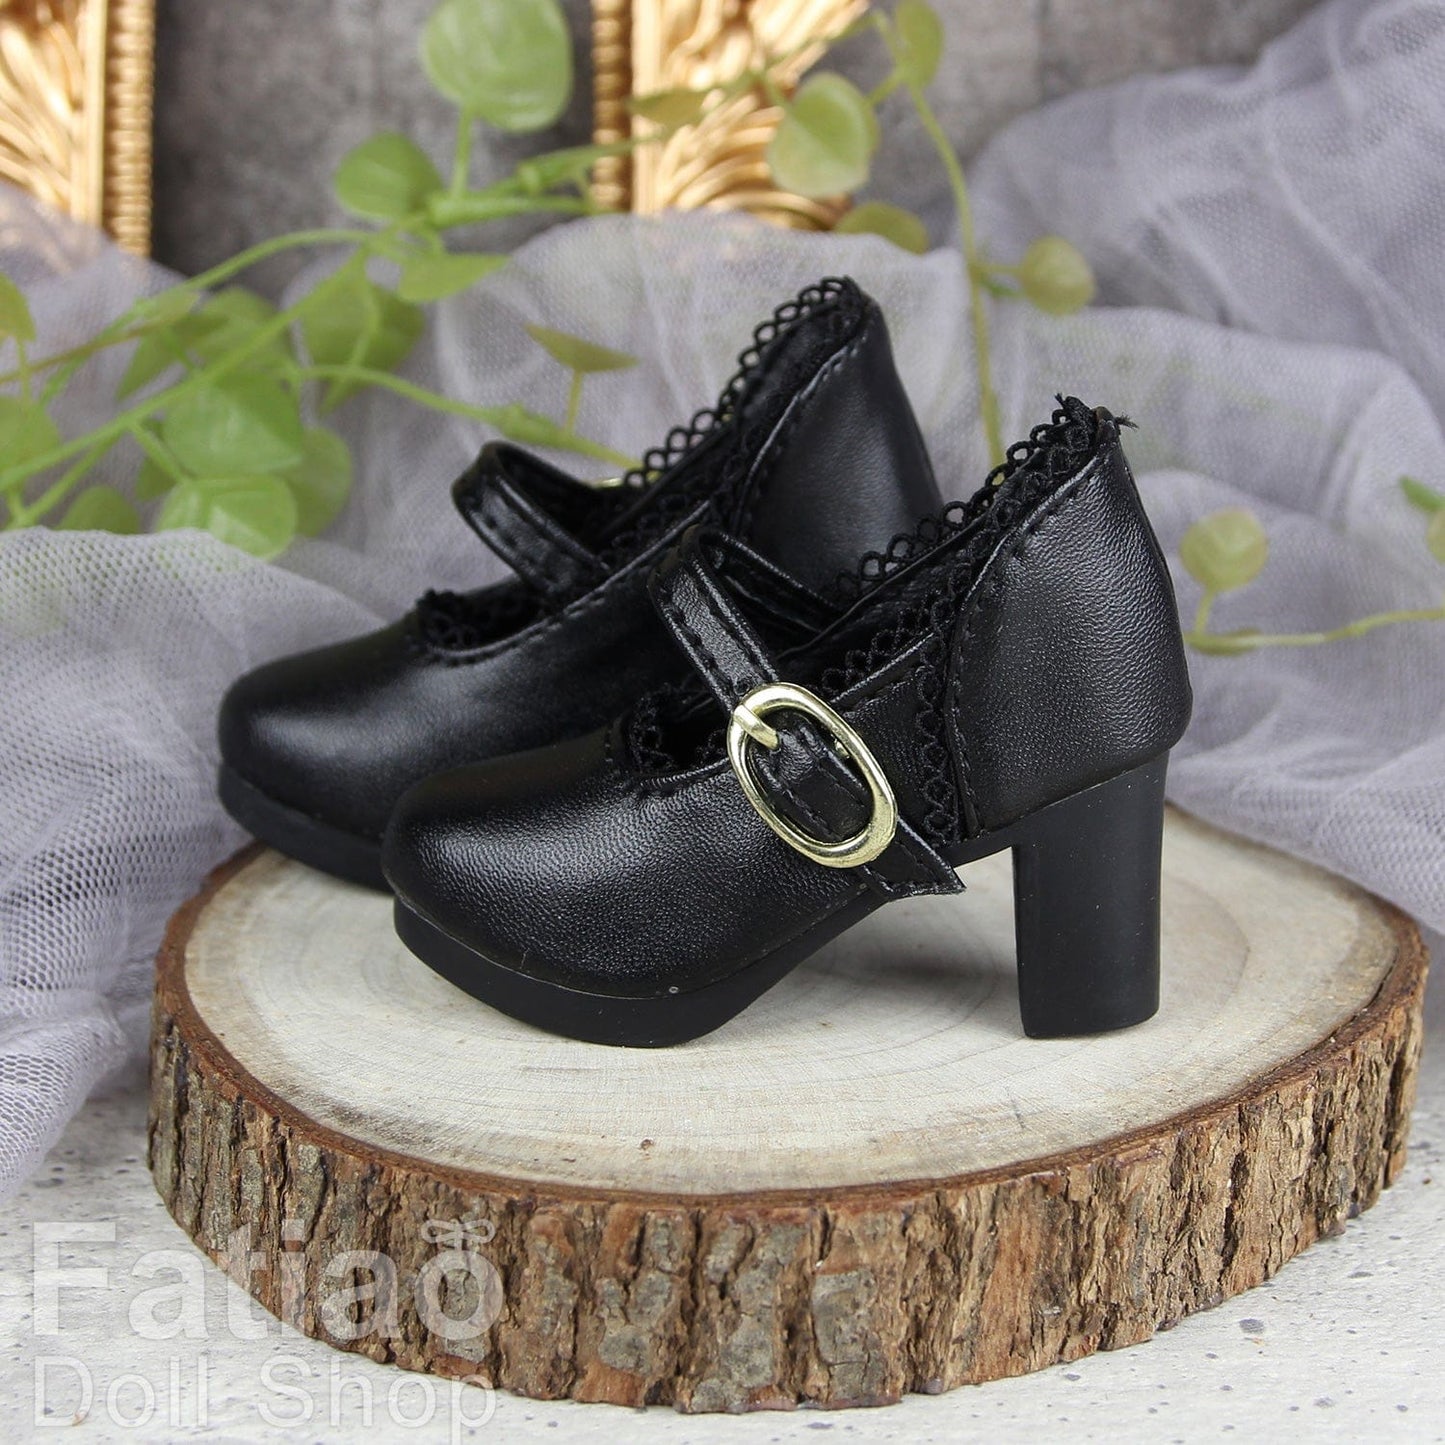 【Fatiao Doll Shop】Lace Thick High Heel C30 Multicolor / BJD SD10 SD13 DD 1/3 scale 